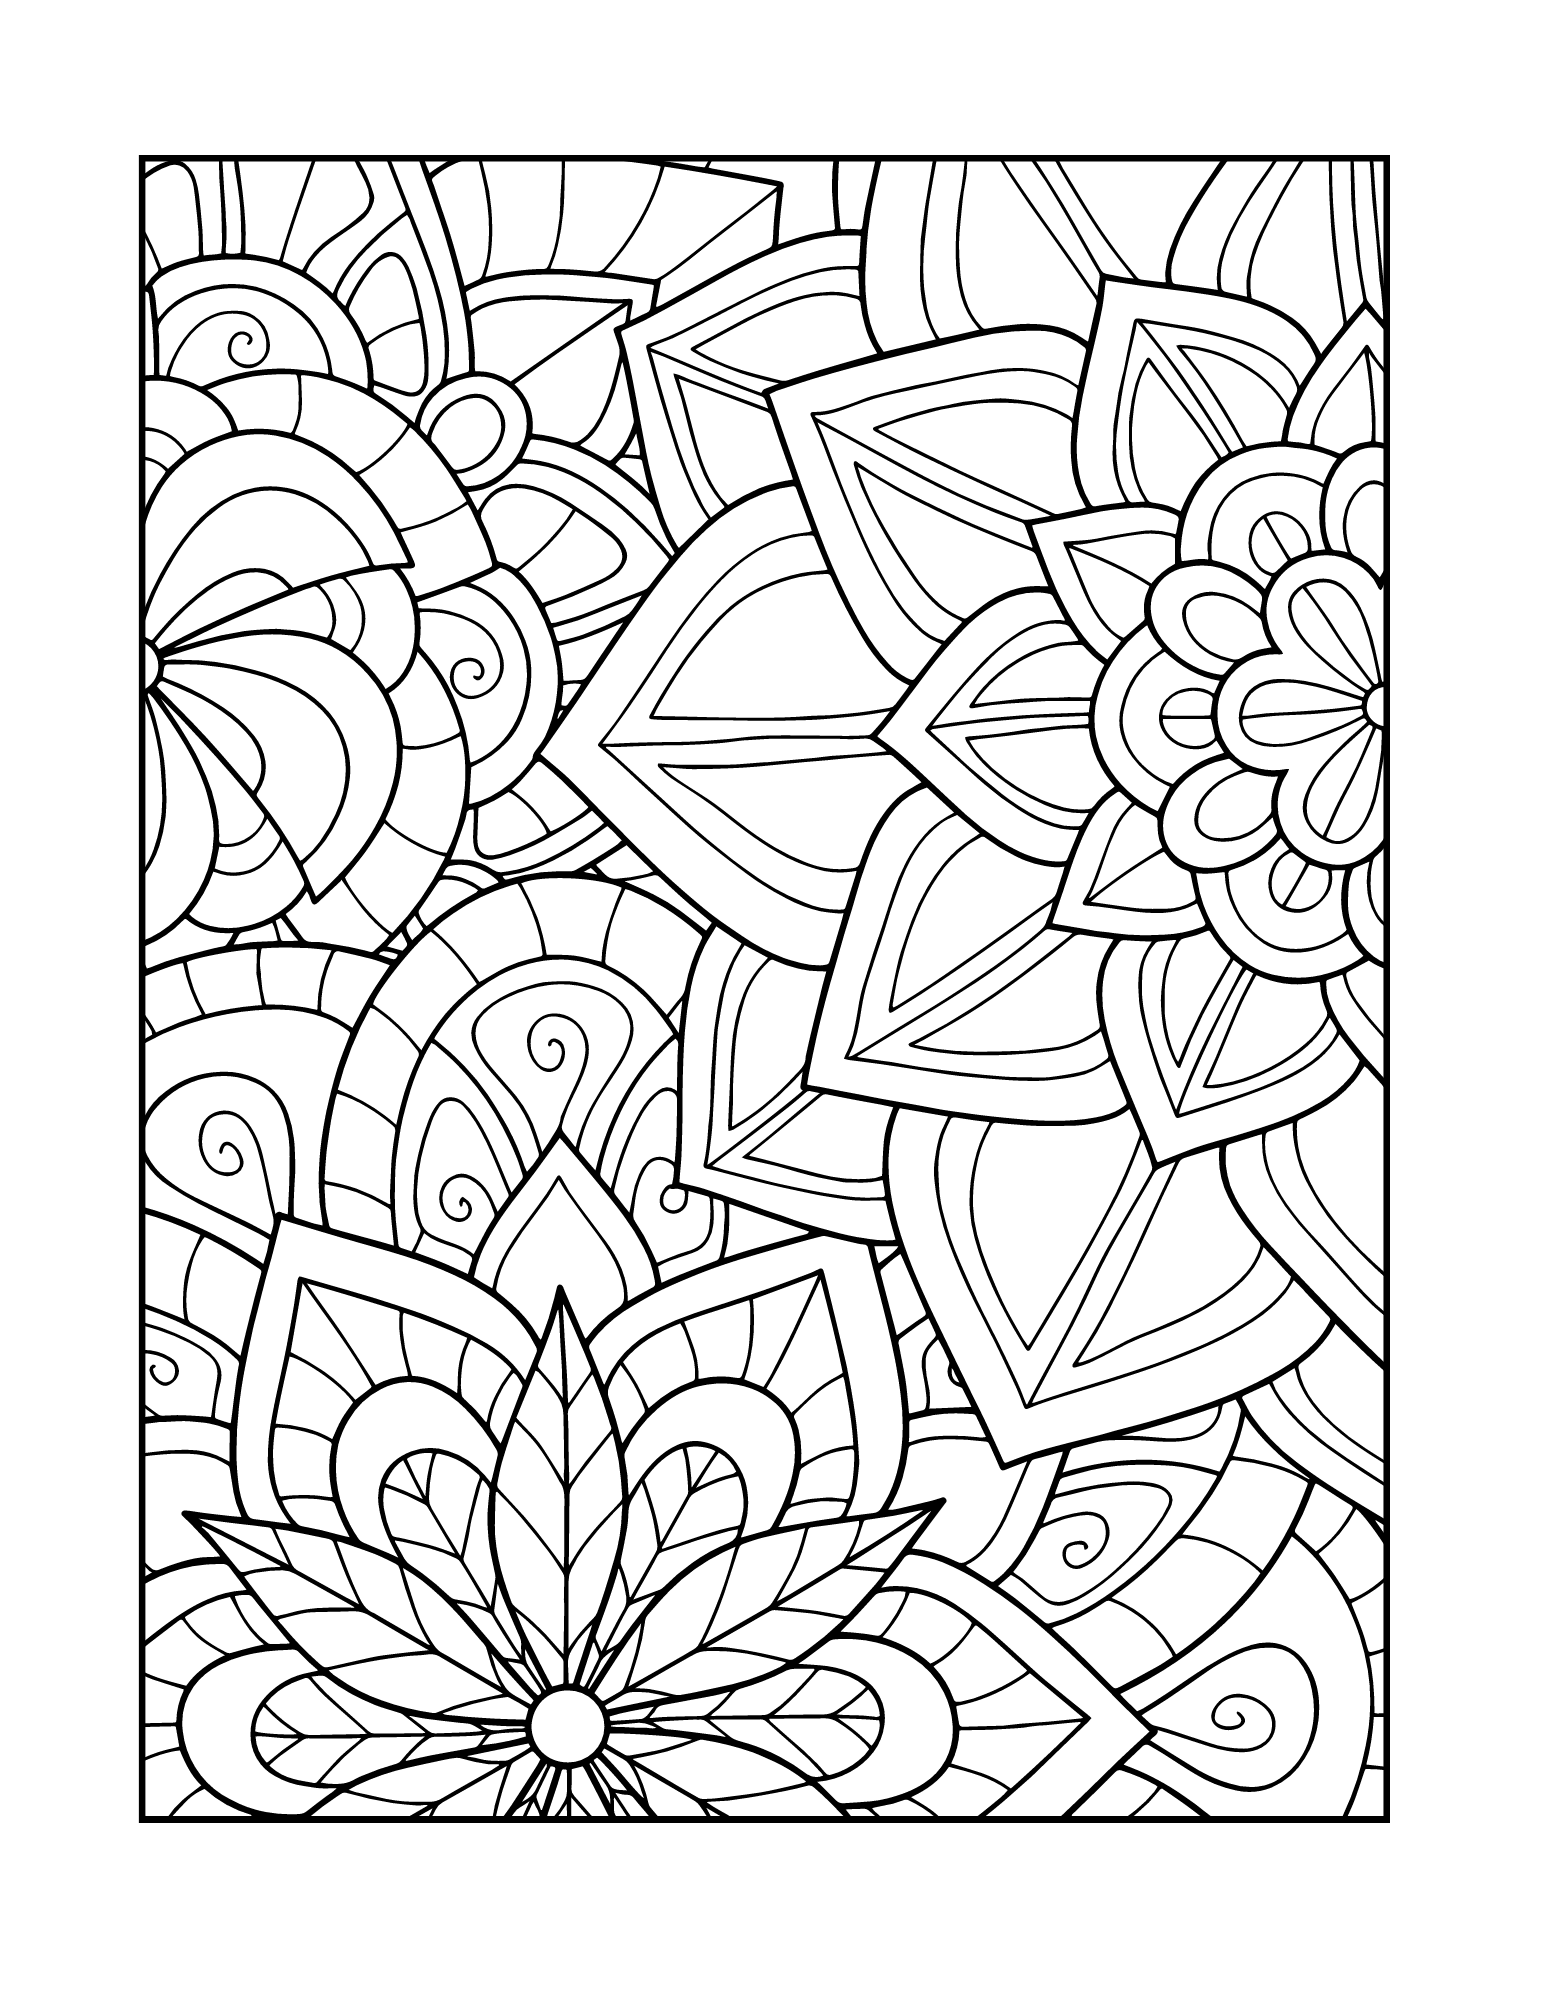 26 PC Mandala Coloring Book Markers Set Stress Relieving Animal Design —  AllTopBargains